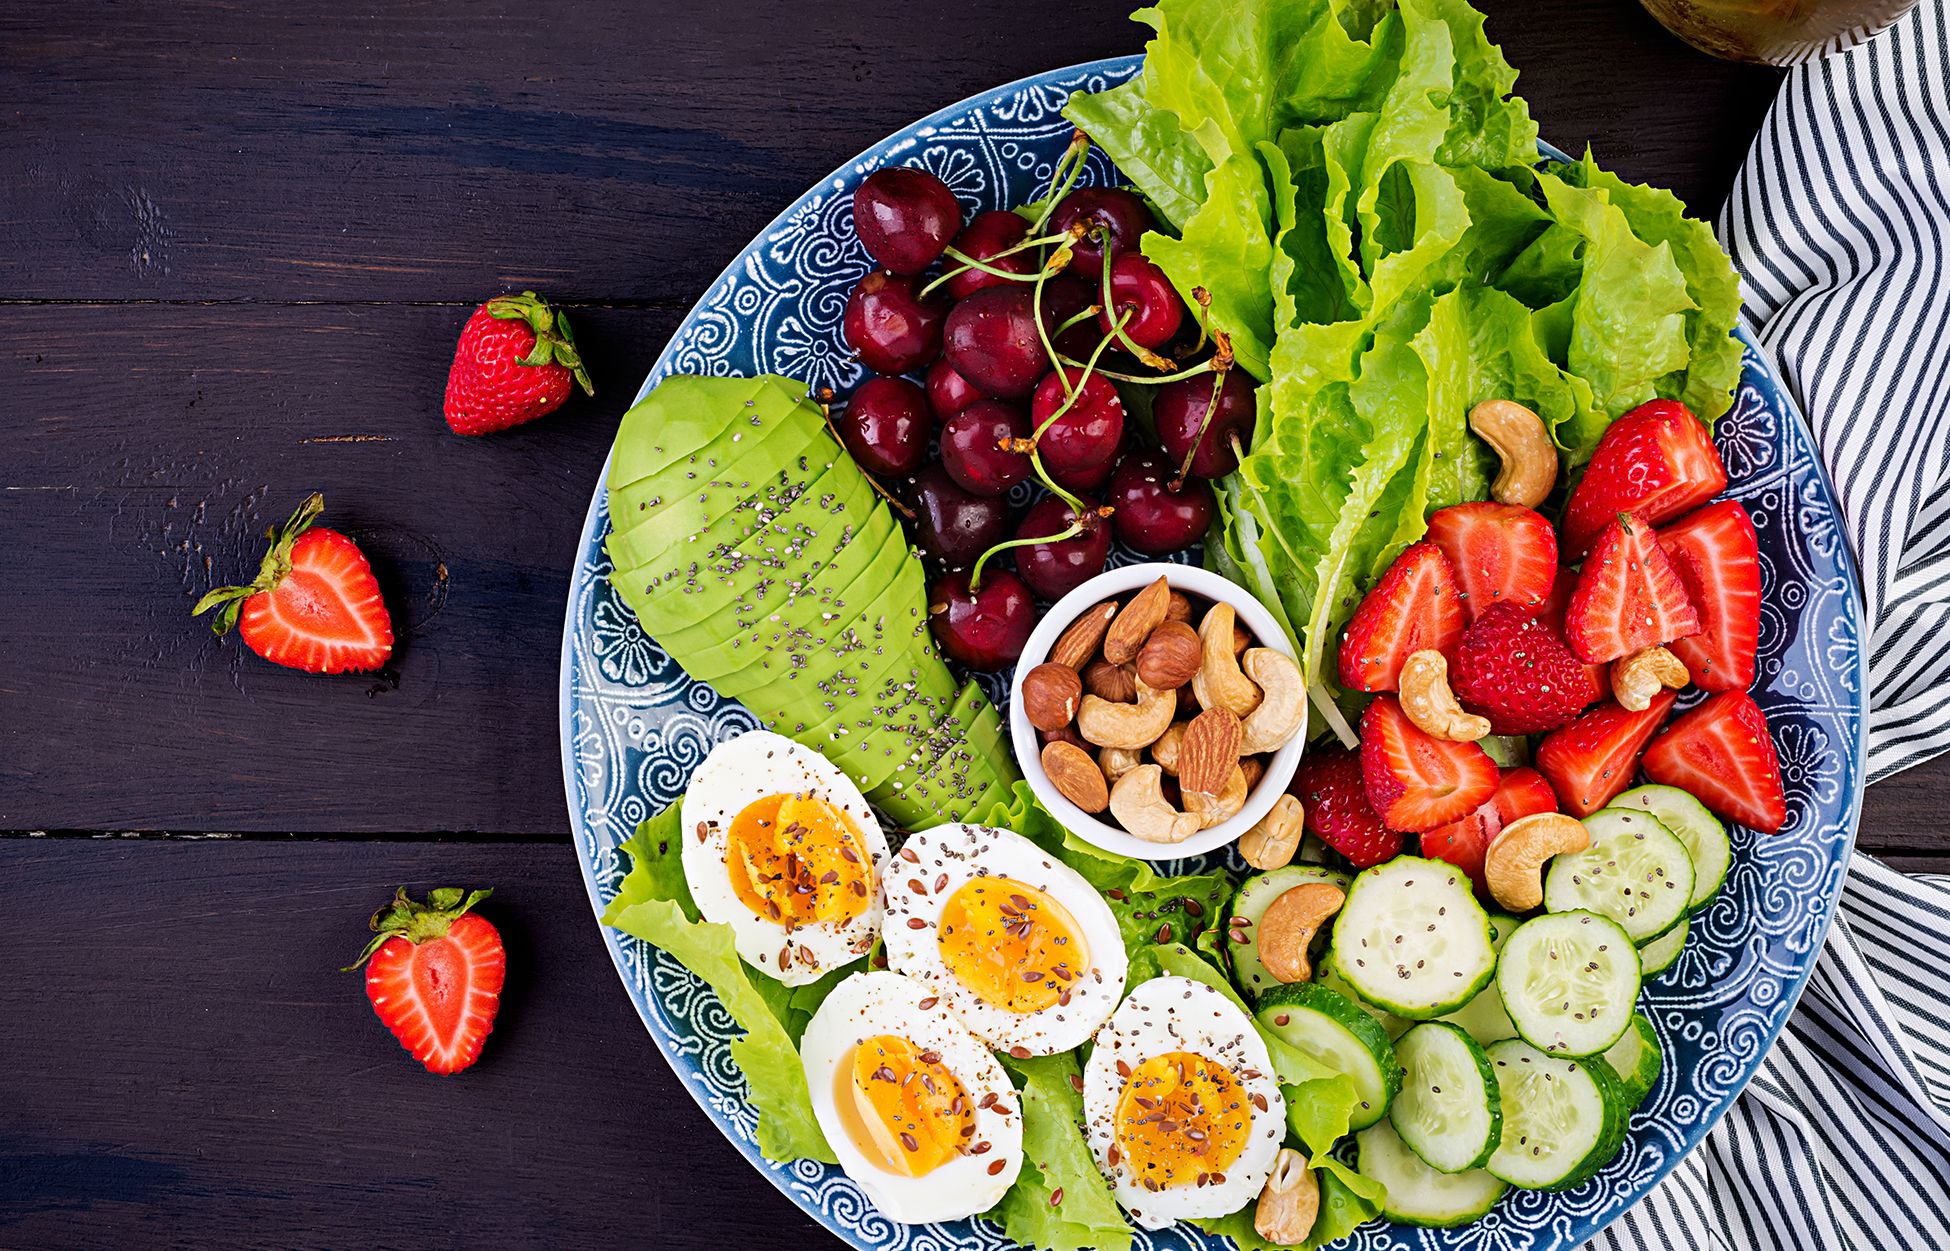 Plate with fruits, vegetables, eggs, nuts, etc. (any variation of this that indicates a balanced diet)